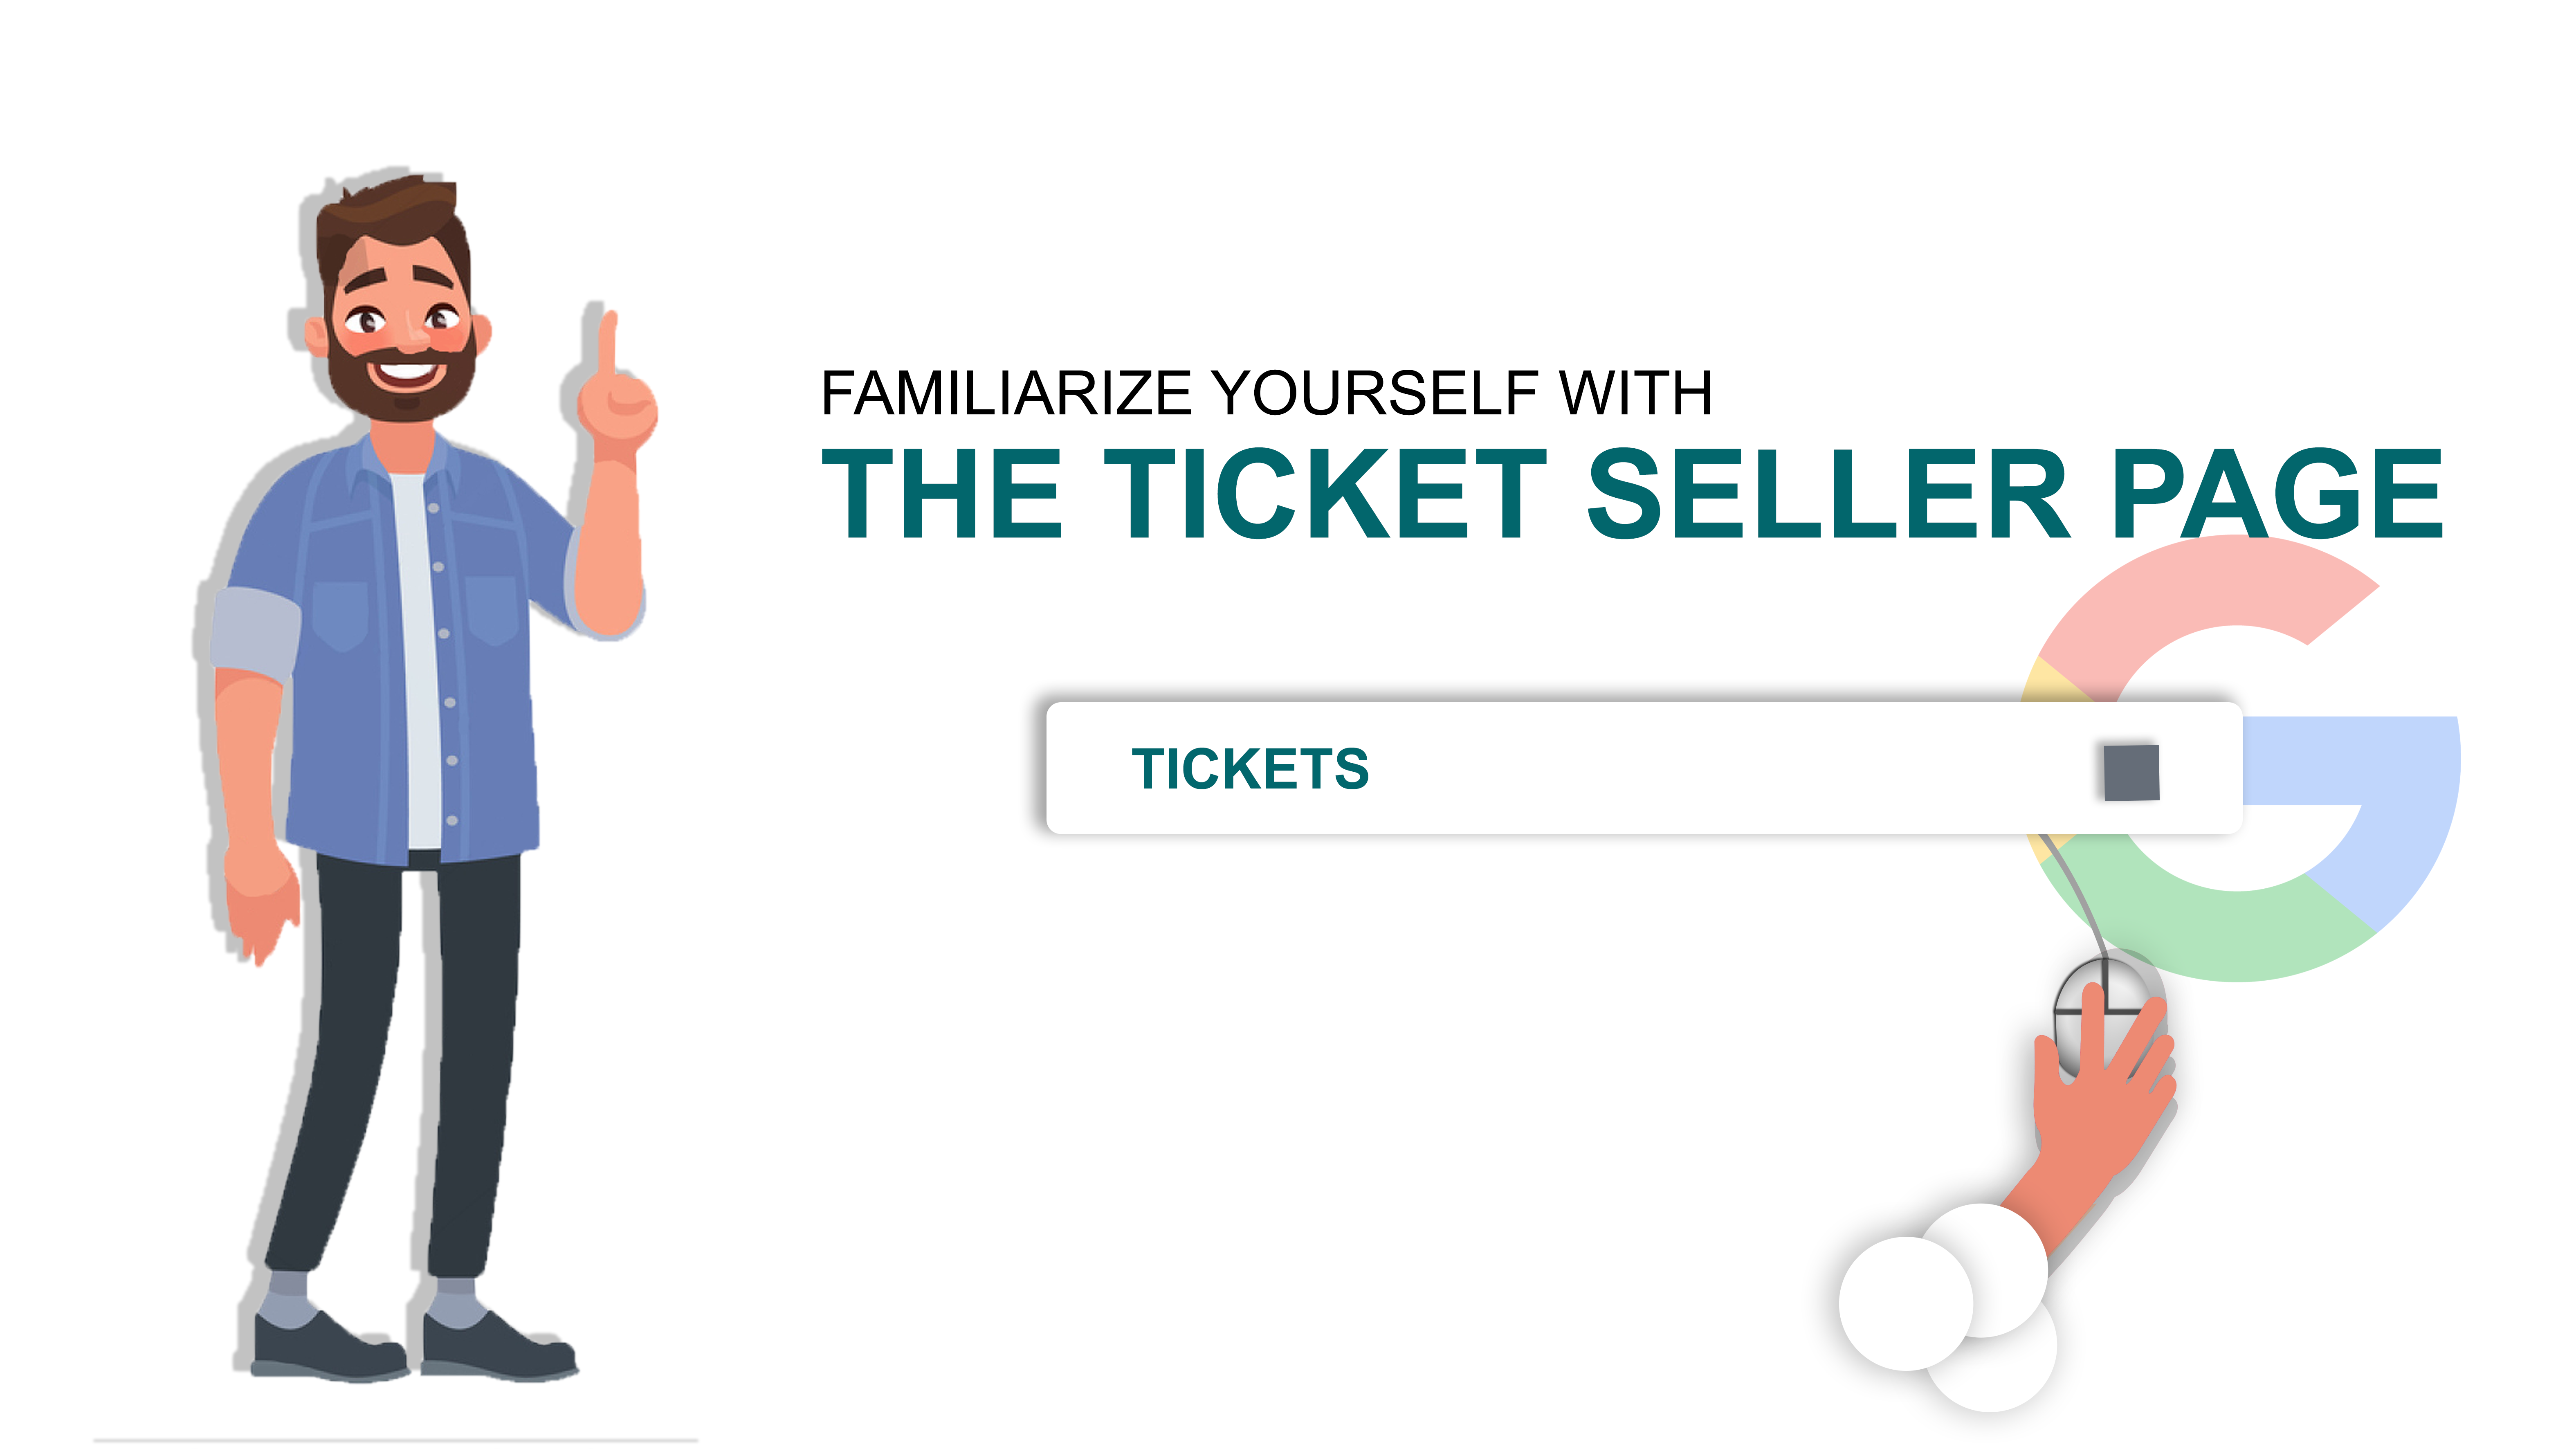 5-Familiarize-Yourself-With-The-Ticket-Seller-Page